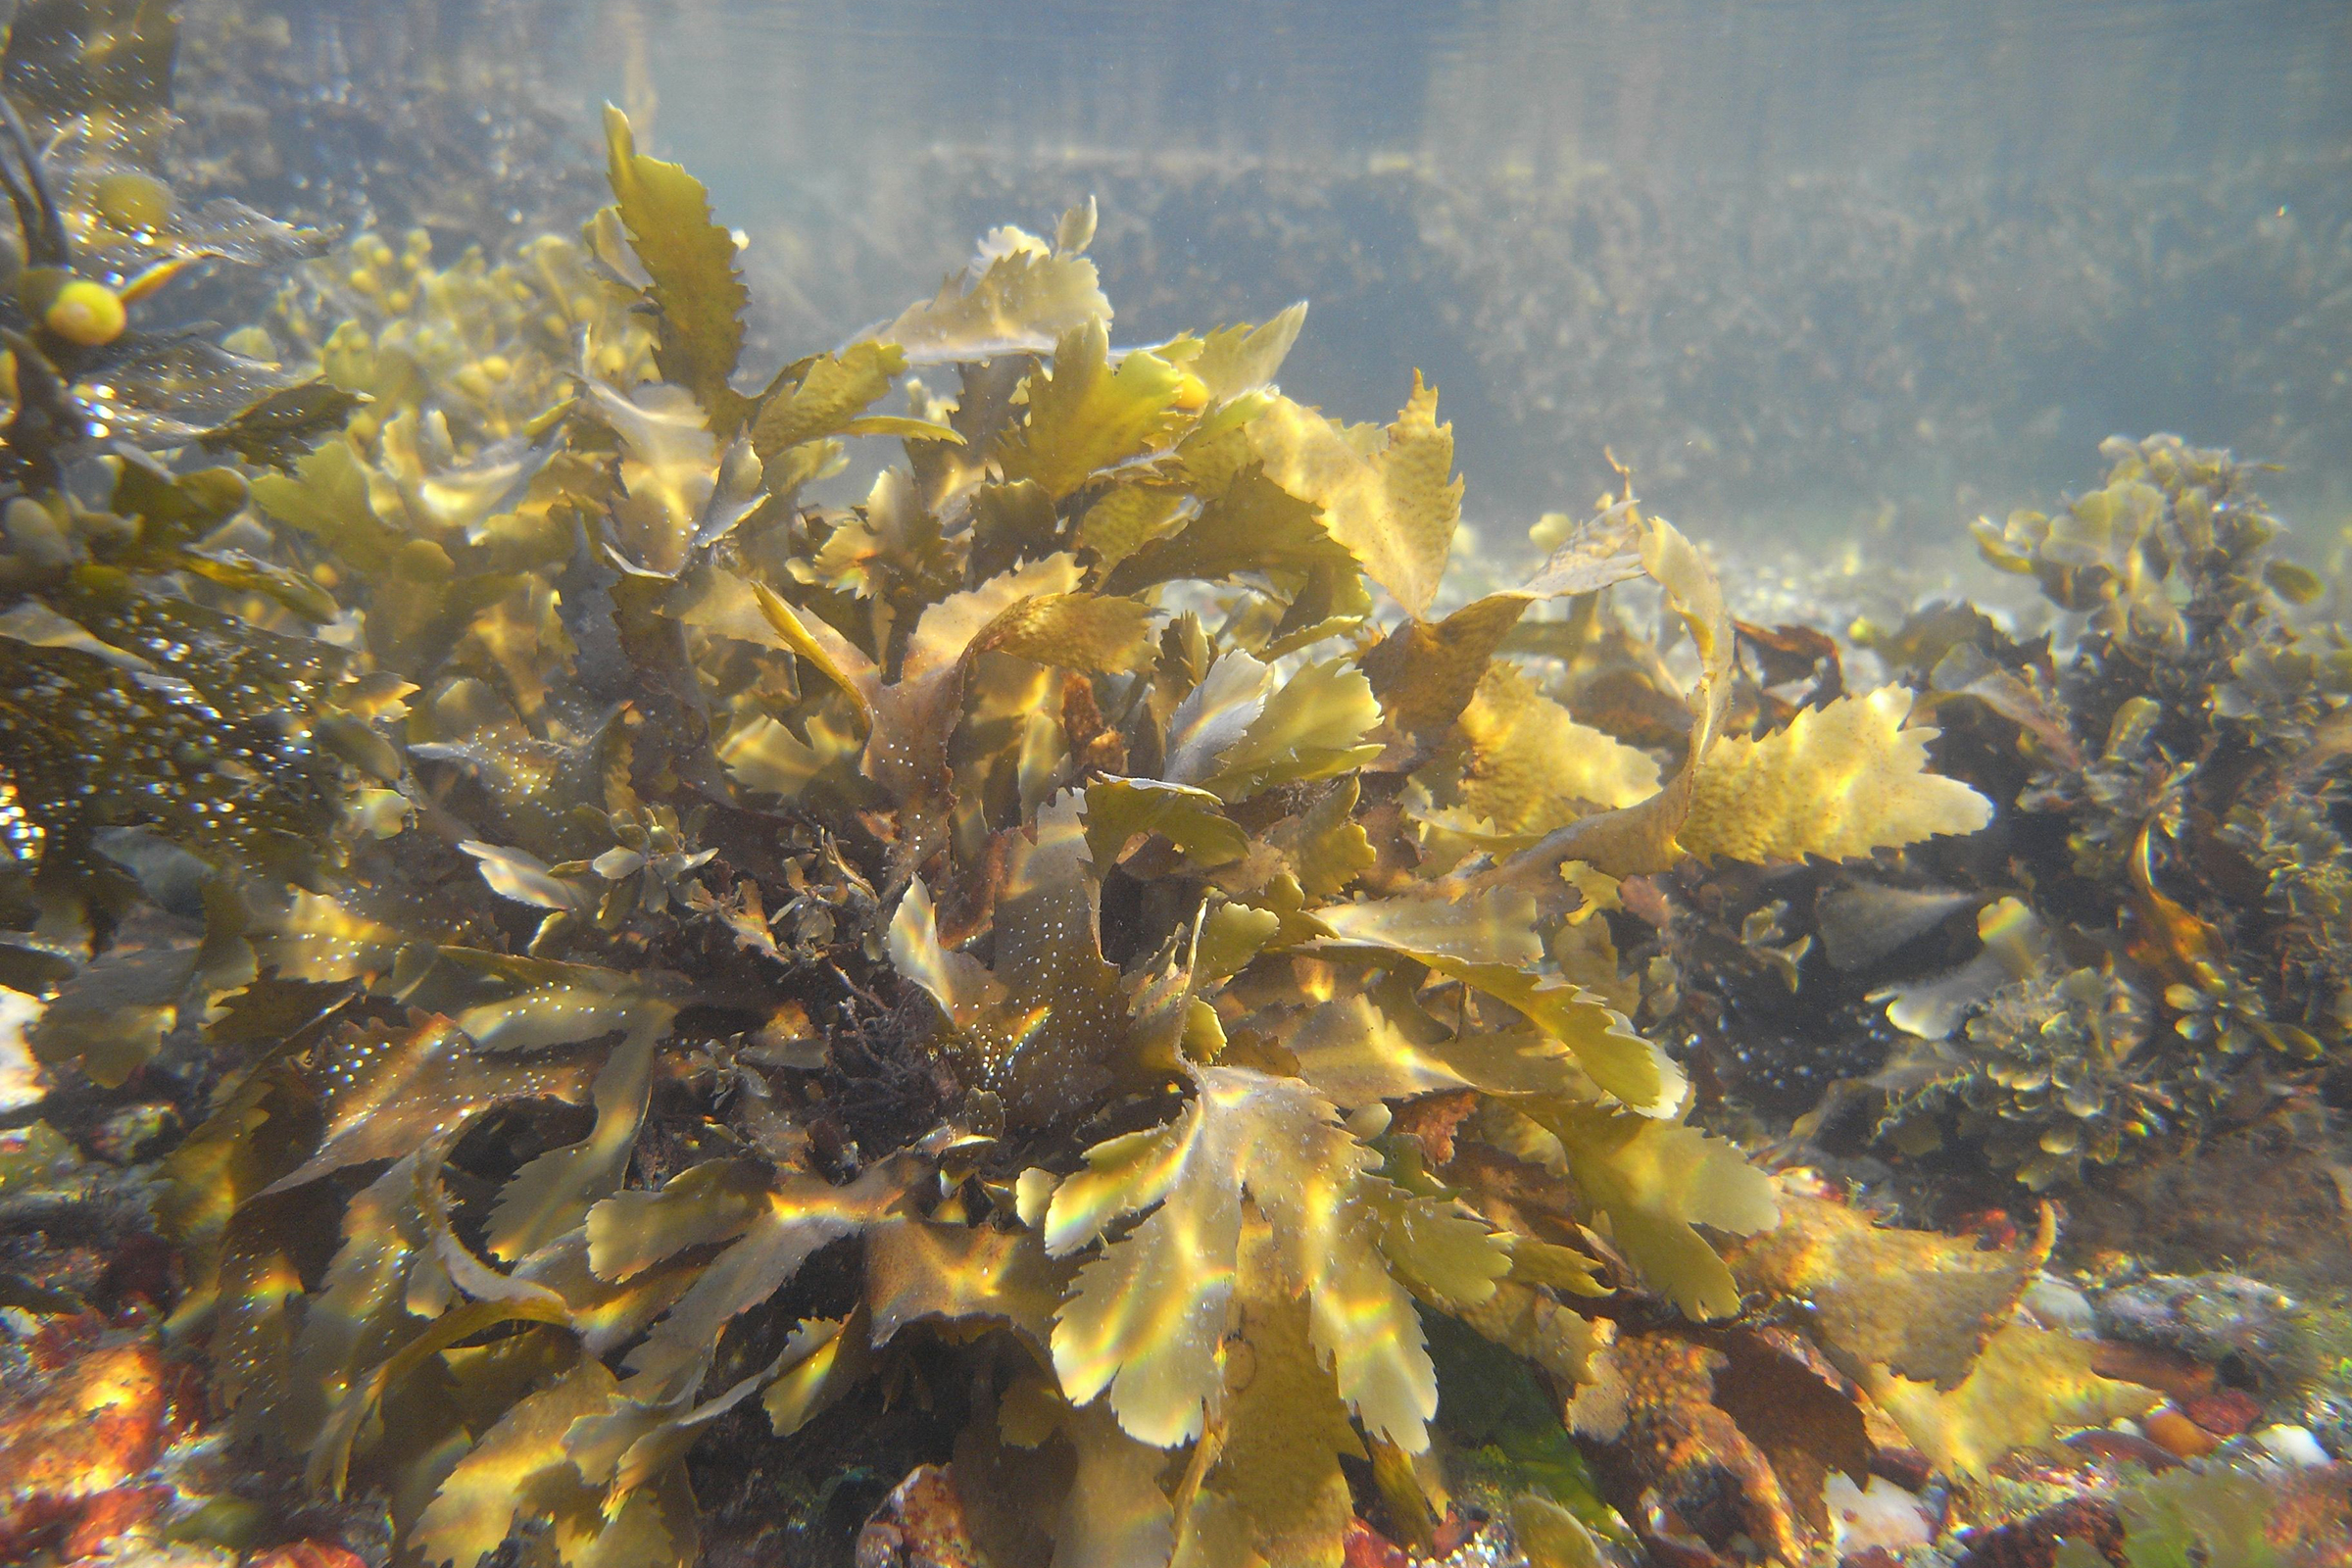 Fucus serratus in its natural habitat. Image from Wikimedia Commons by Grubio--1